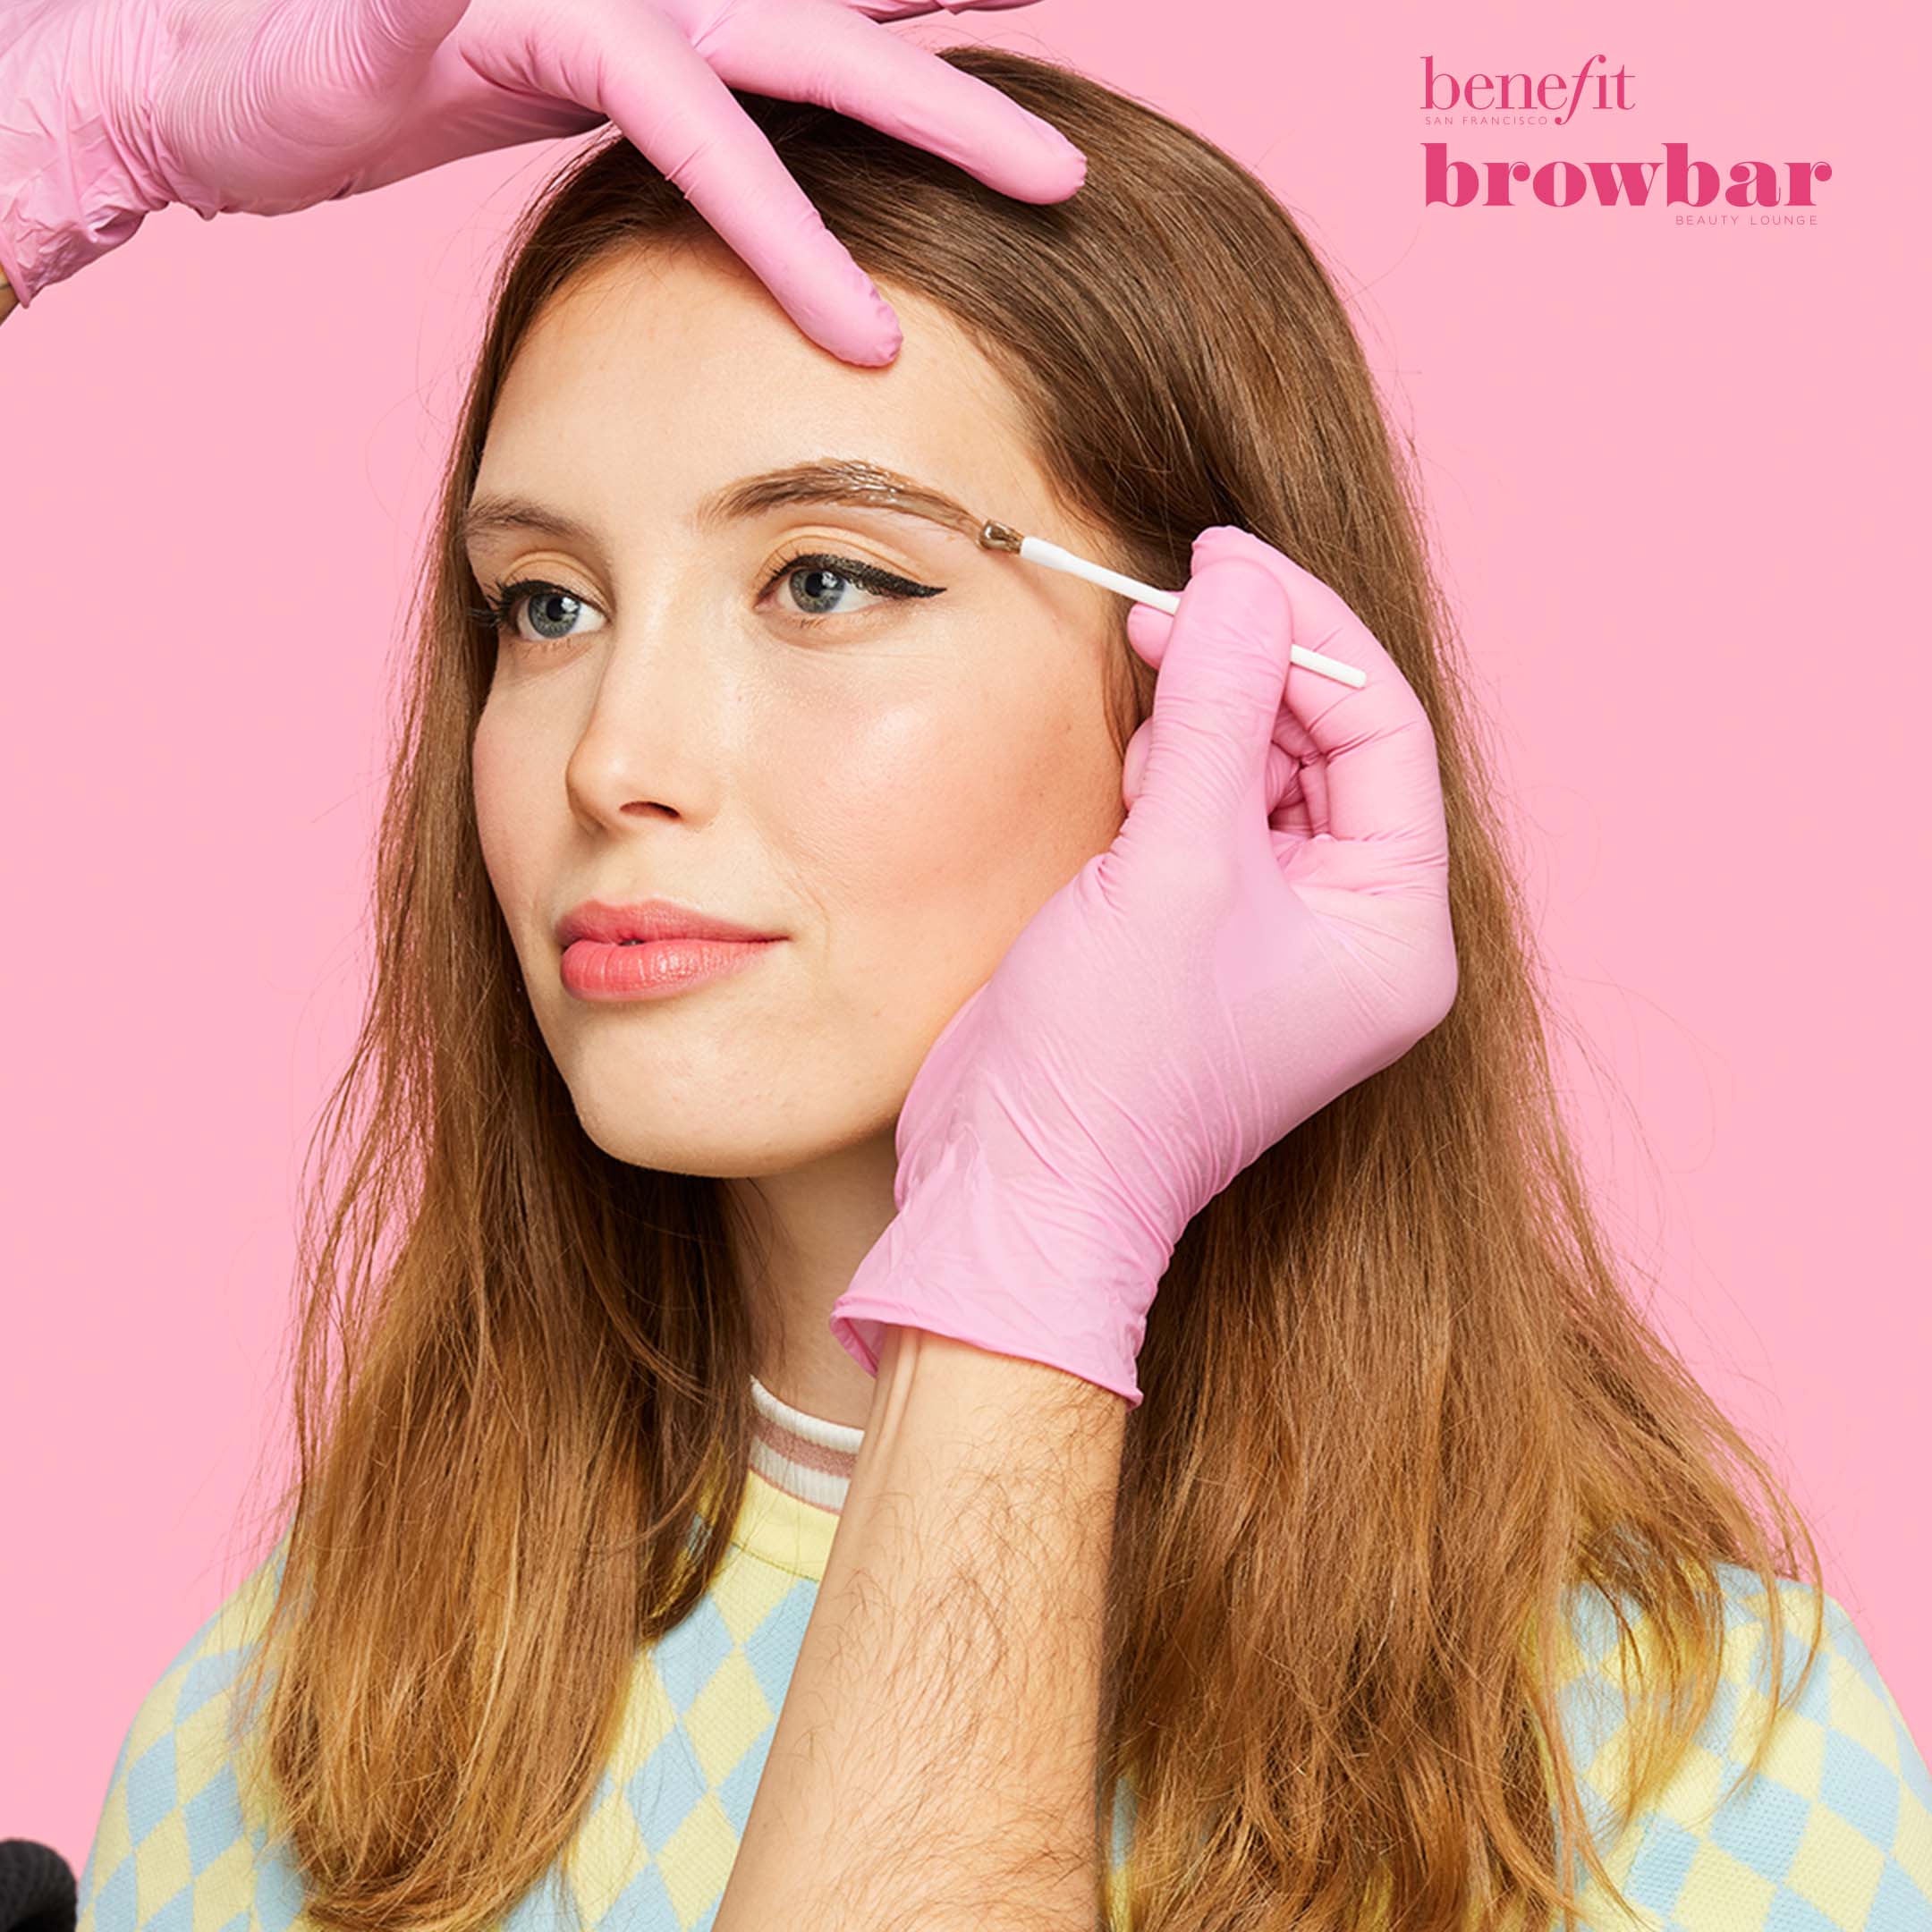 Sephora's “Benefit Brow Bar” Eyebrow Wax Review - Love, Life & the Little  One